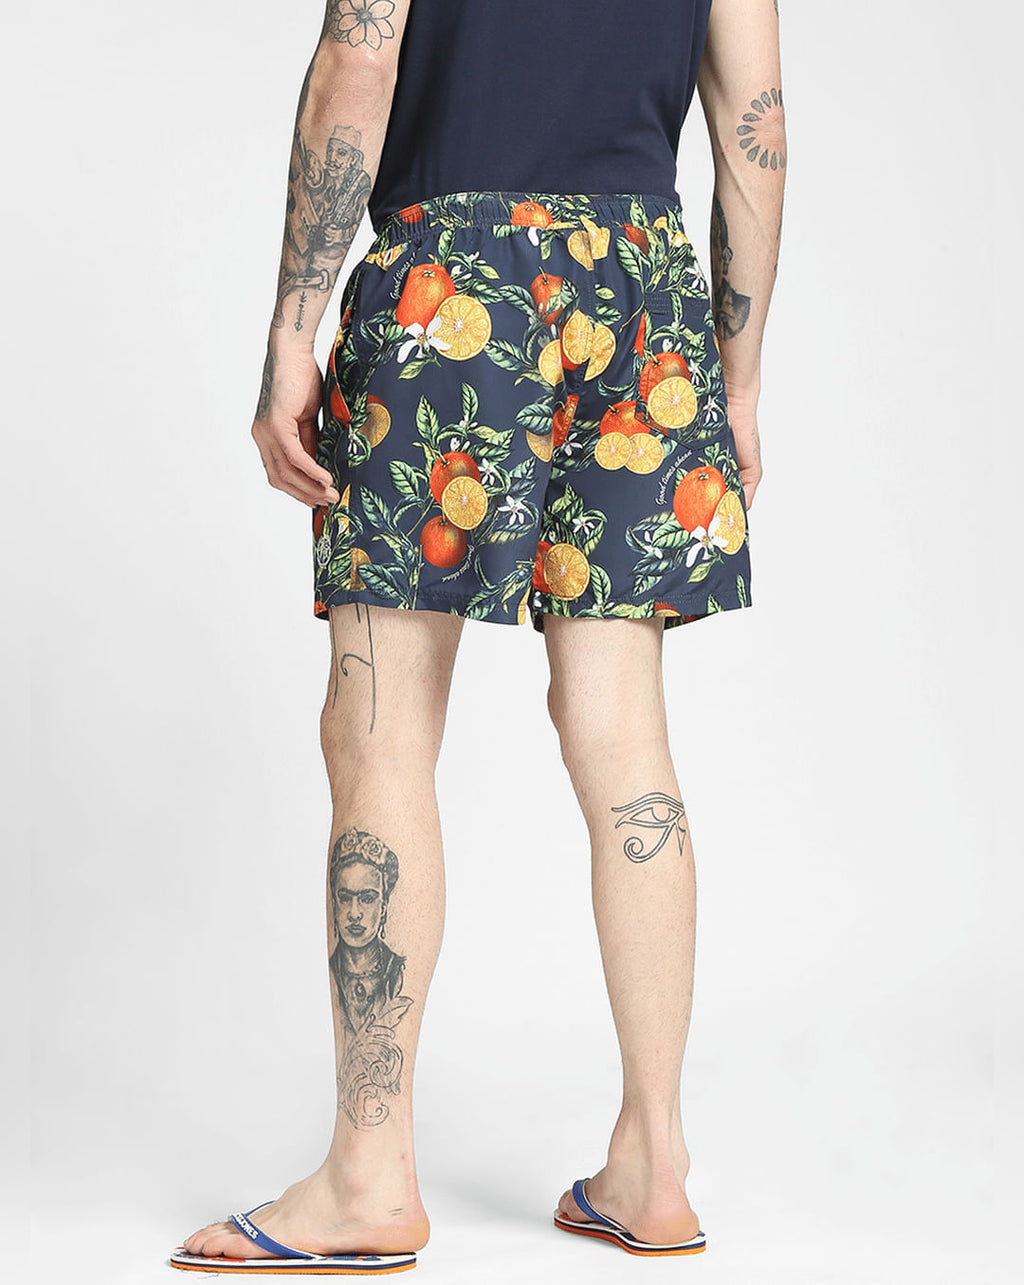 The Beach Company - Online Swimsuit store - Buy printed swim shorts online for men